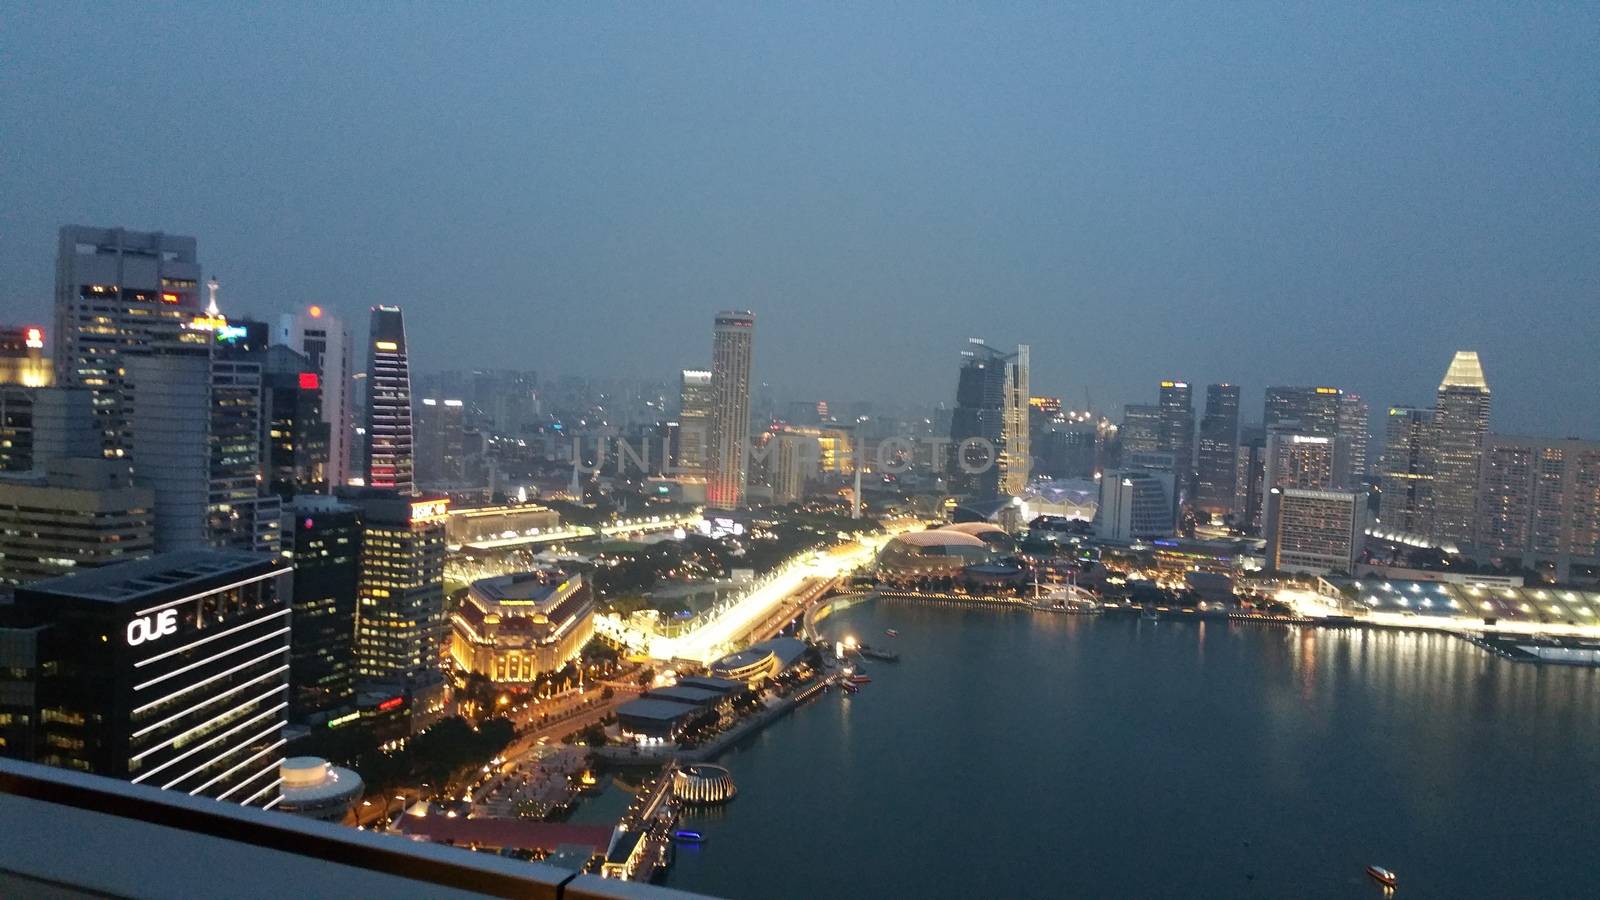 SINGAPORE: The terrible air pollution in Singapore known as the haze - caused by Indonesian forest fires and land clearances - continues on September 17, 2015, enveloping the CBD and Marina Bay. 